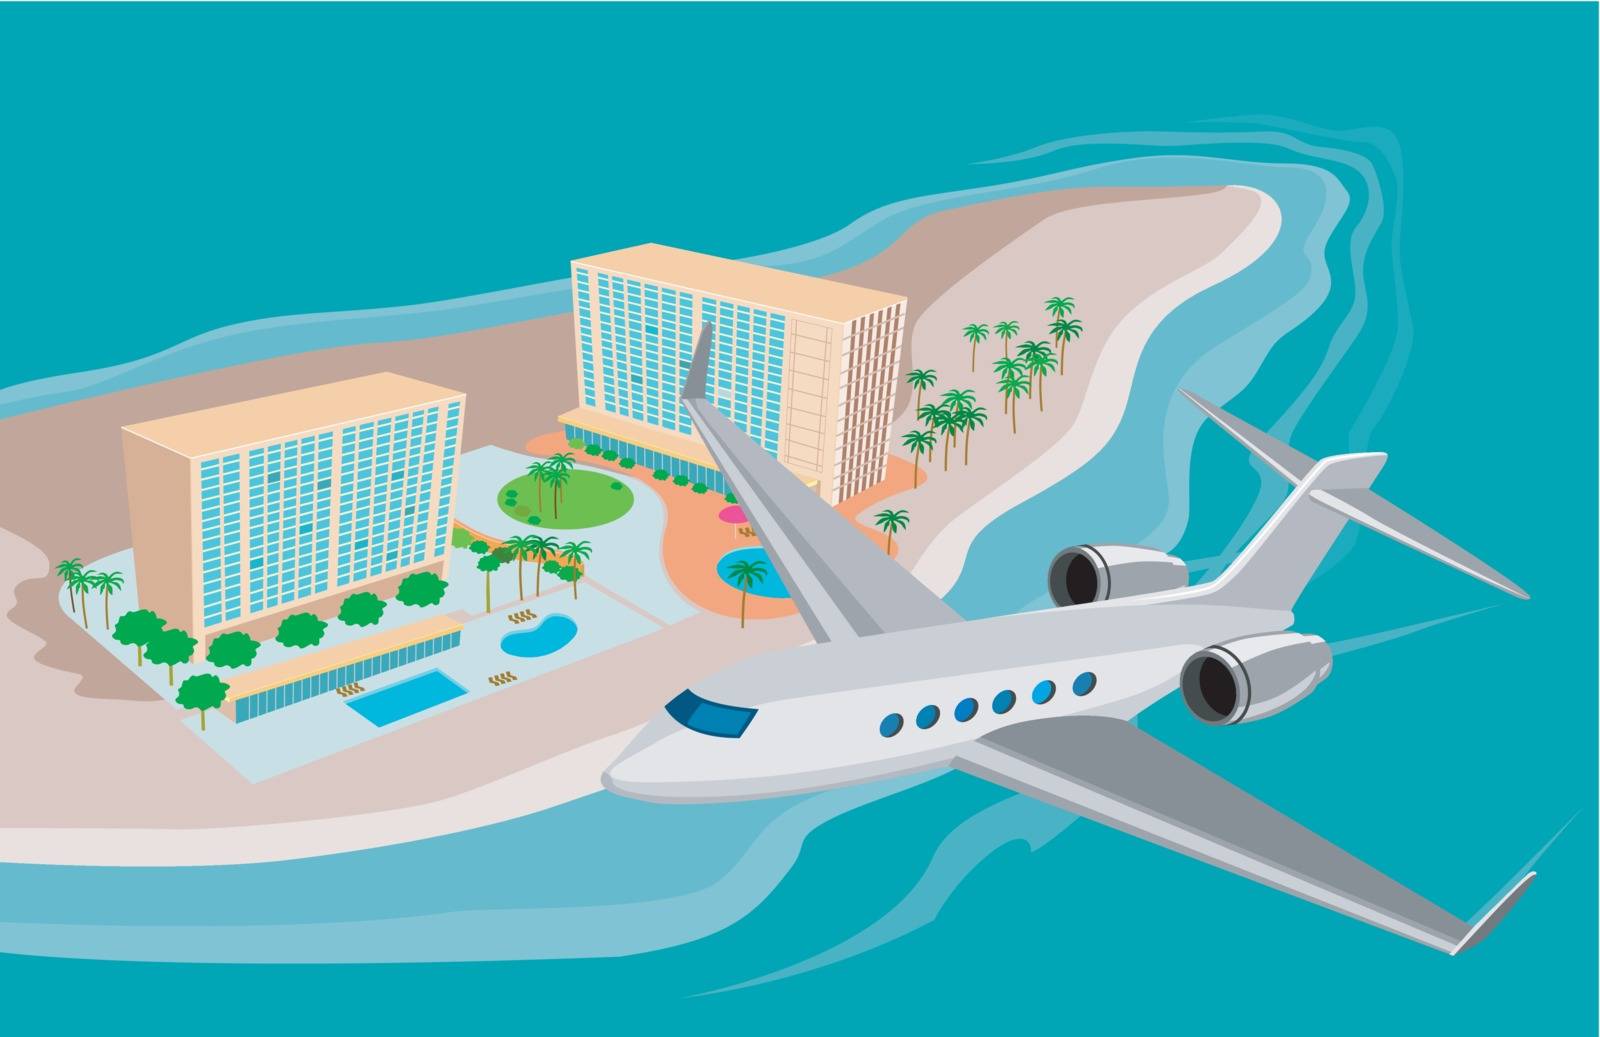 Illustration of an airplane flying over an island beach resort done in retro style. 